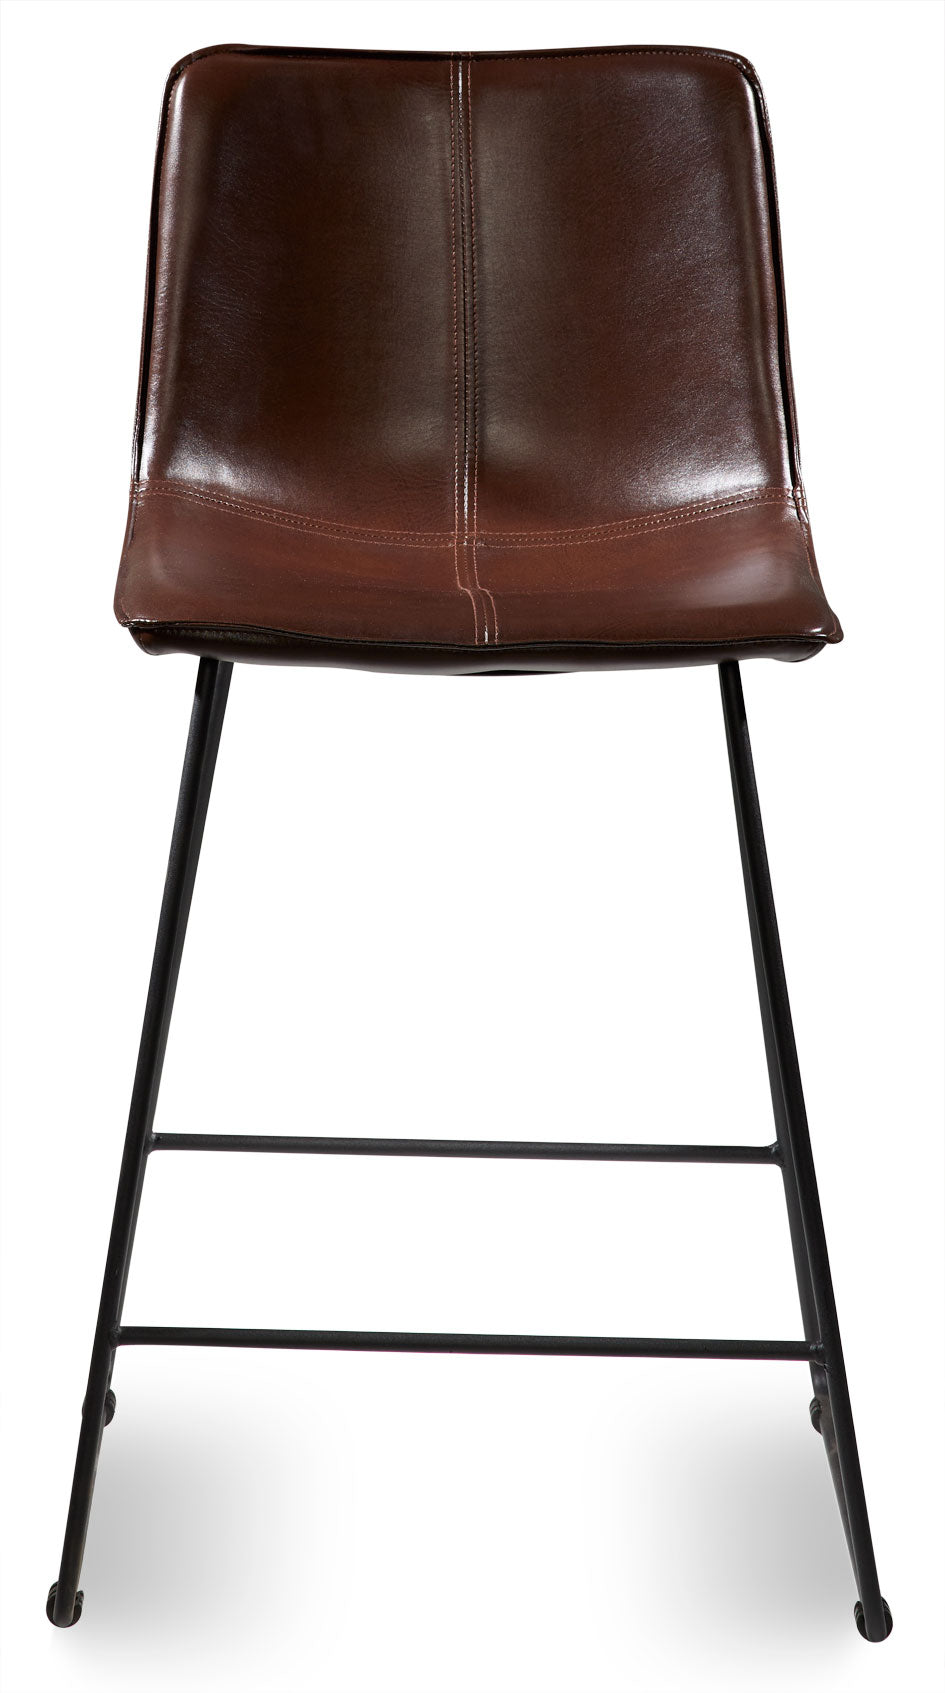 Leo Counter Height Stool - Brown